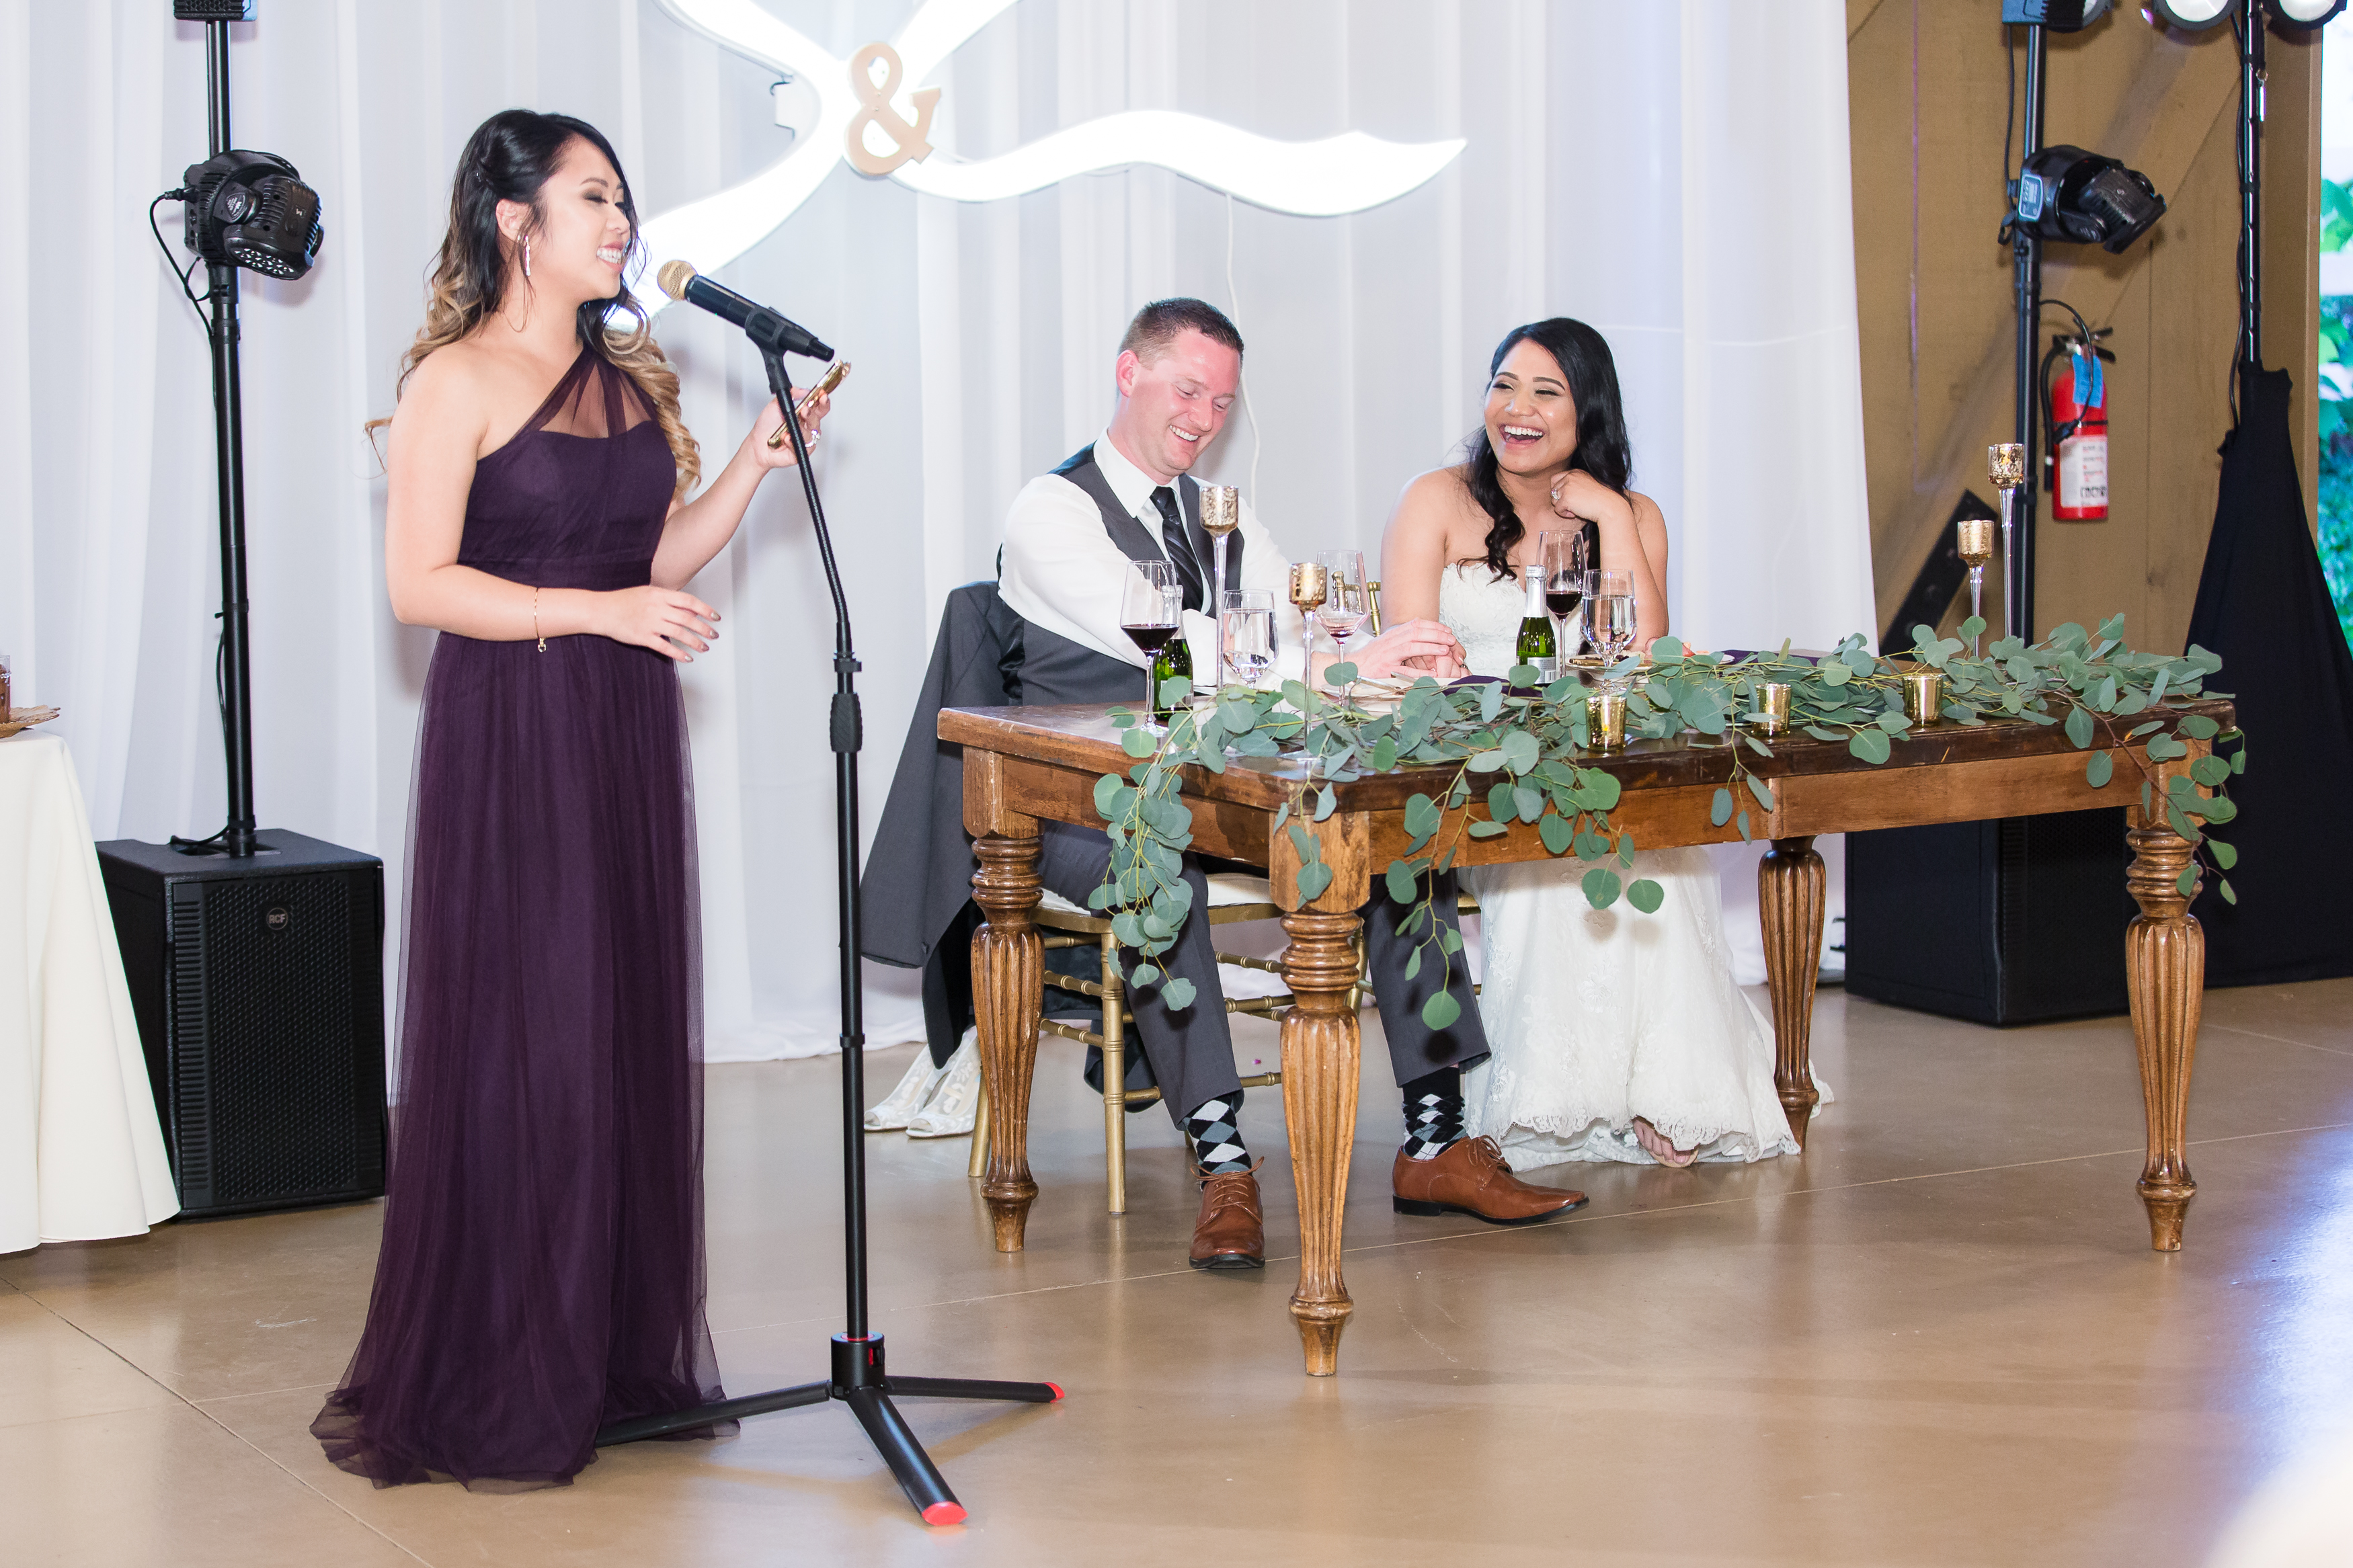 Wedding couple laughing at bridesmaid during toast